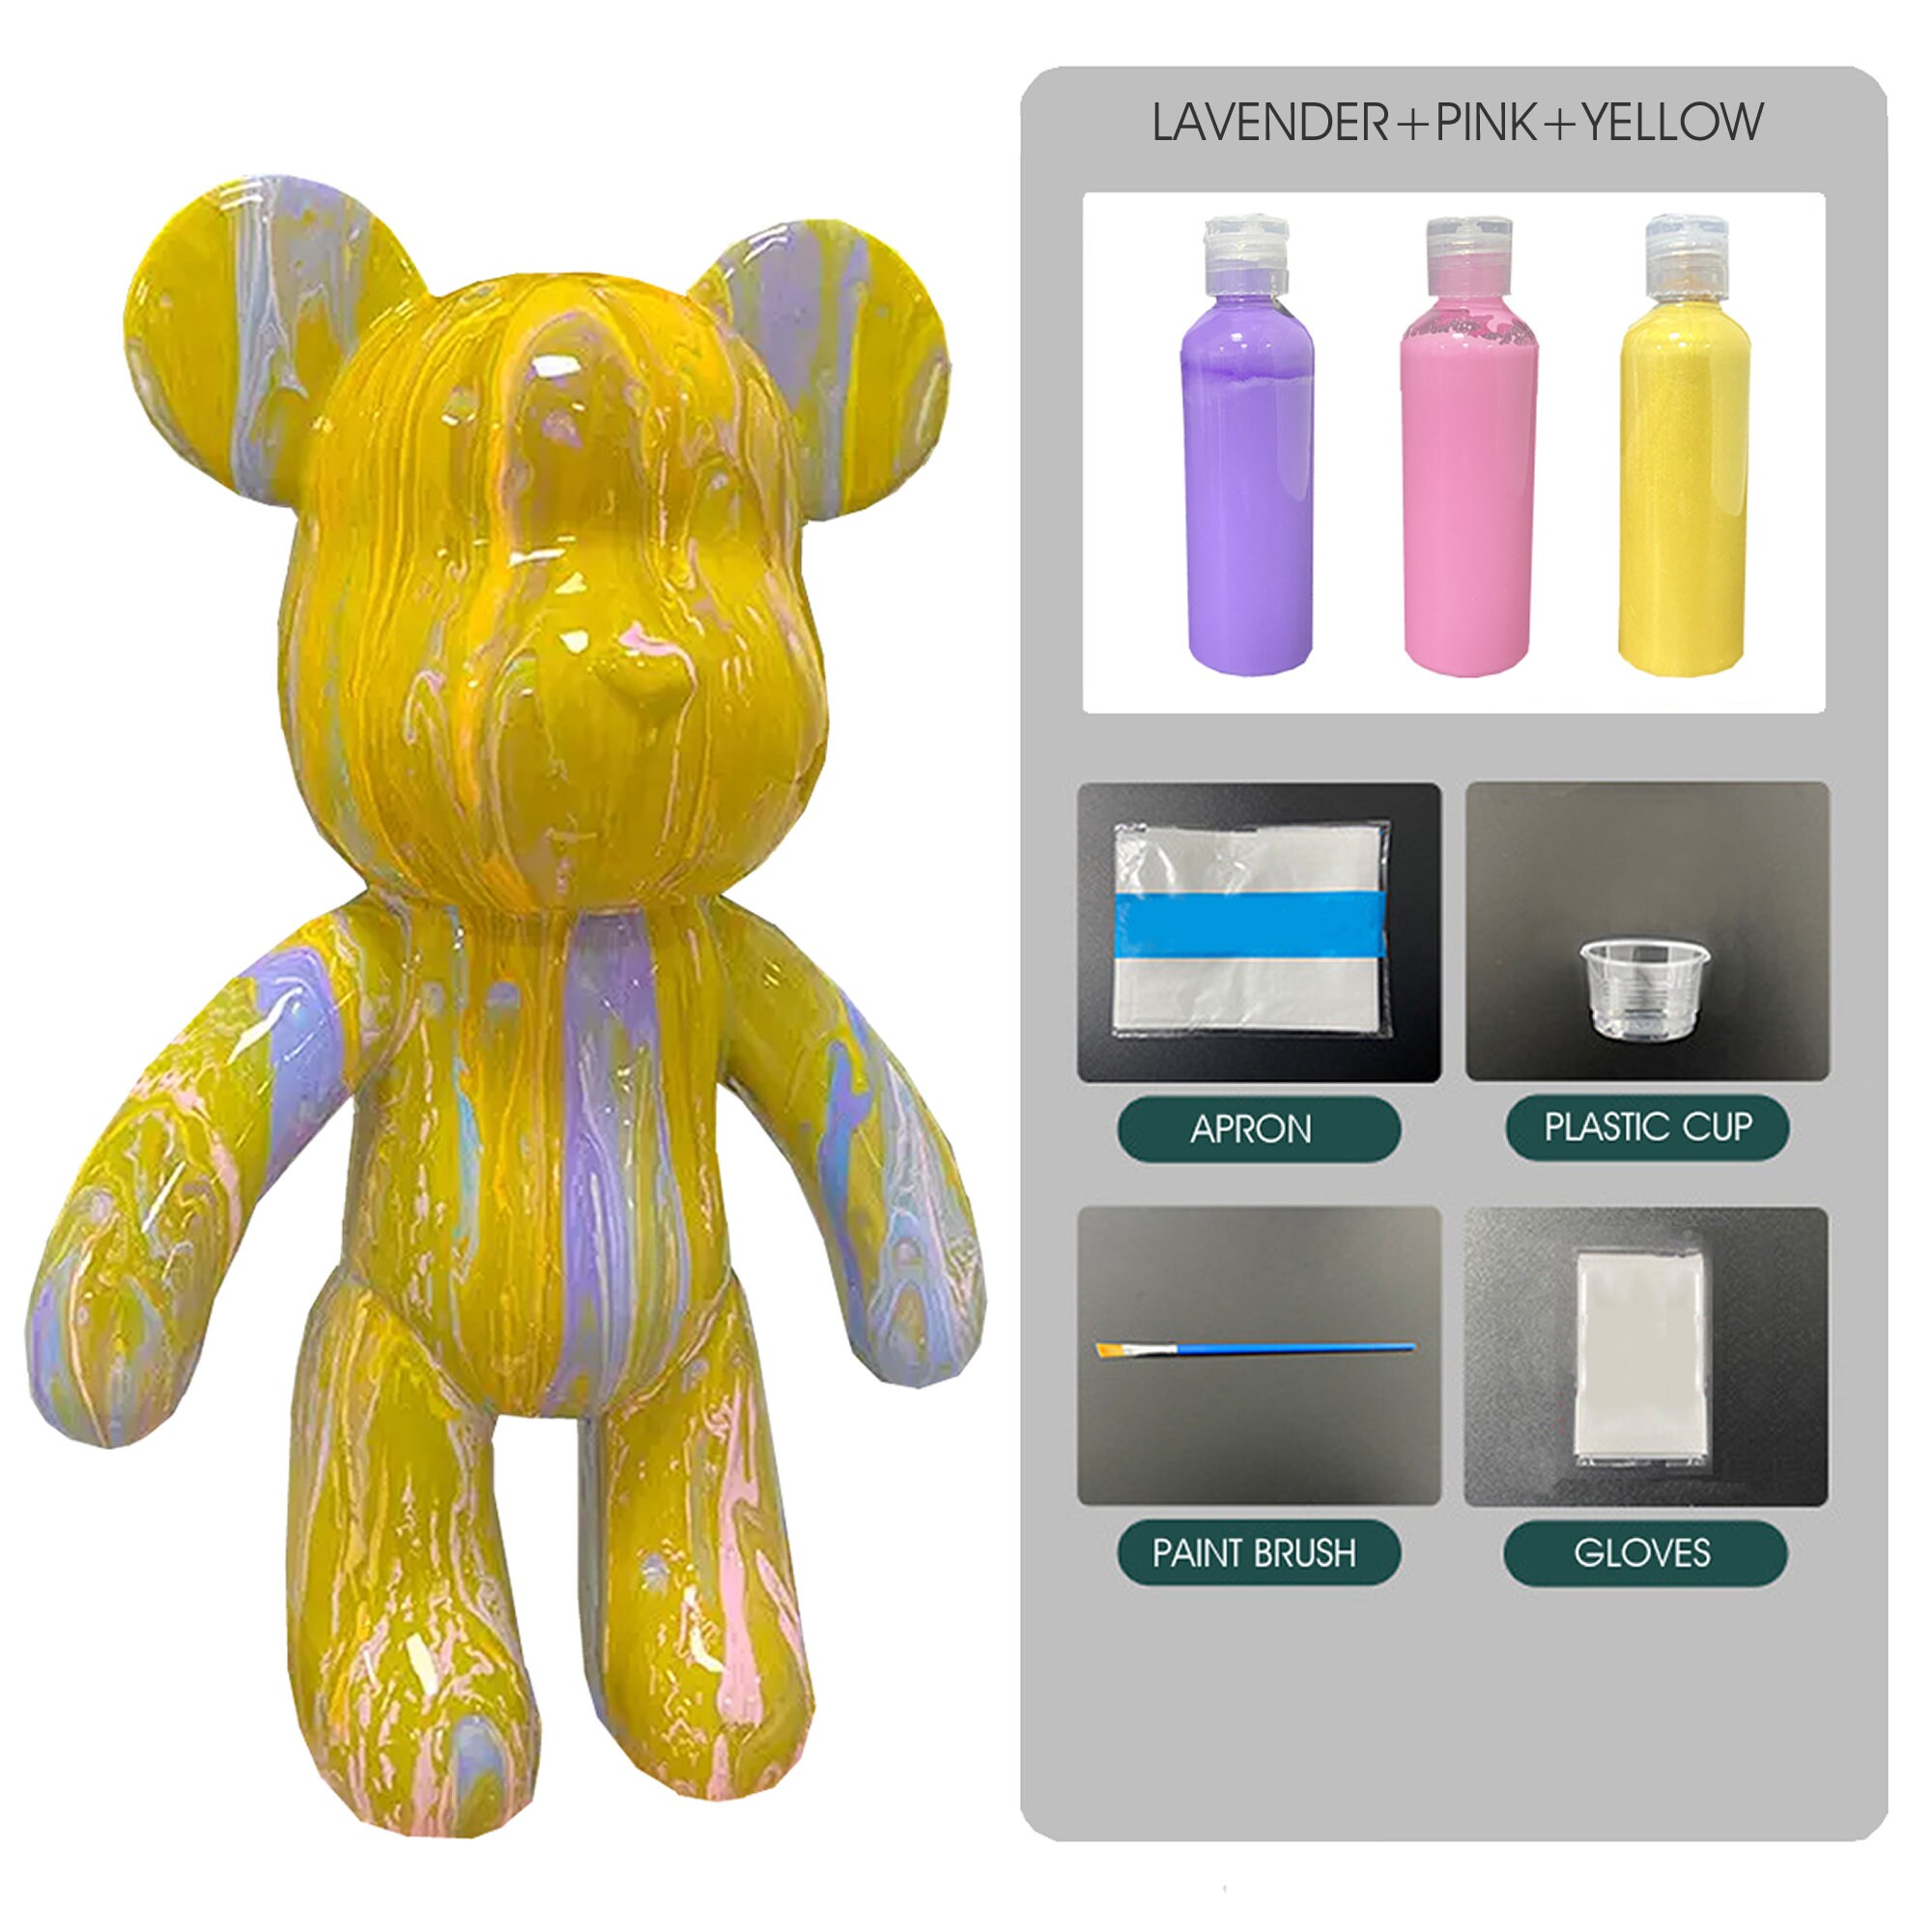 DIY Fluid Bear / Drip Paint Bear - comes with 3 paint bottles - comes with  art materials like paintbrush, disposable table cover, cup…